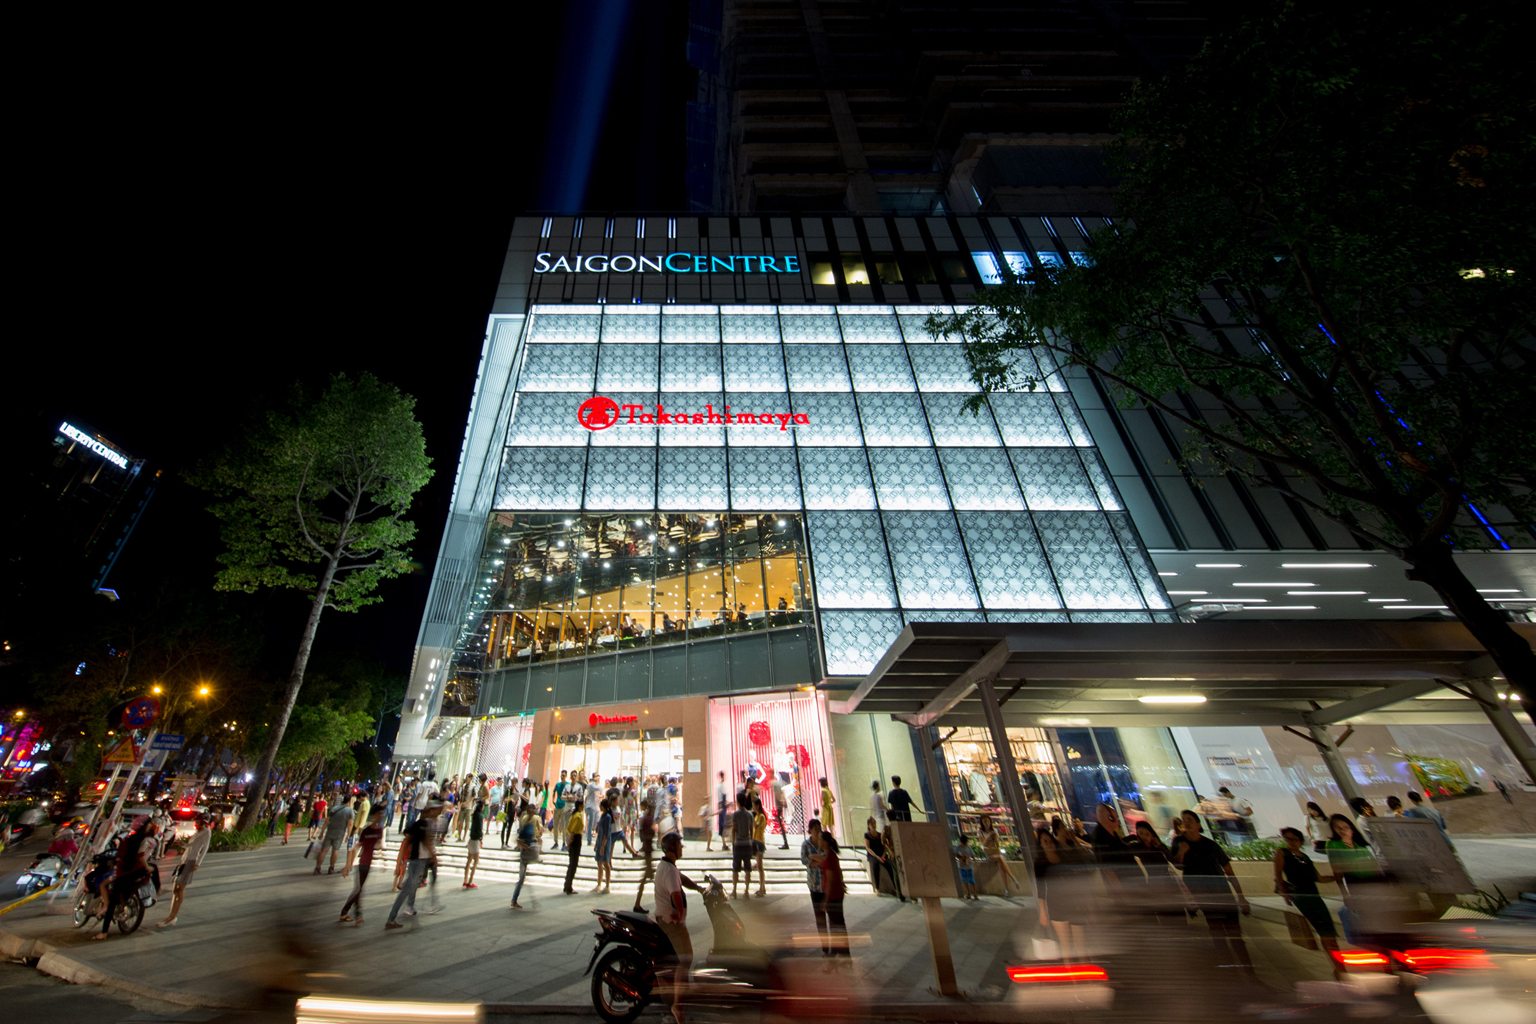 Keppel Land's new retail mall in Ho Chi Minh City's Saigon Centre is part of plans to increase its presence in Vietnam anchored by Japanese retail giant Takashimaya, its first outlet in the city